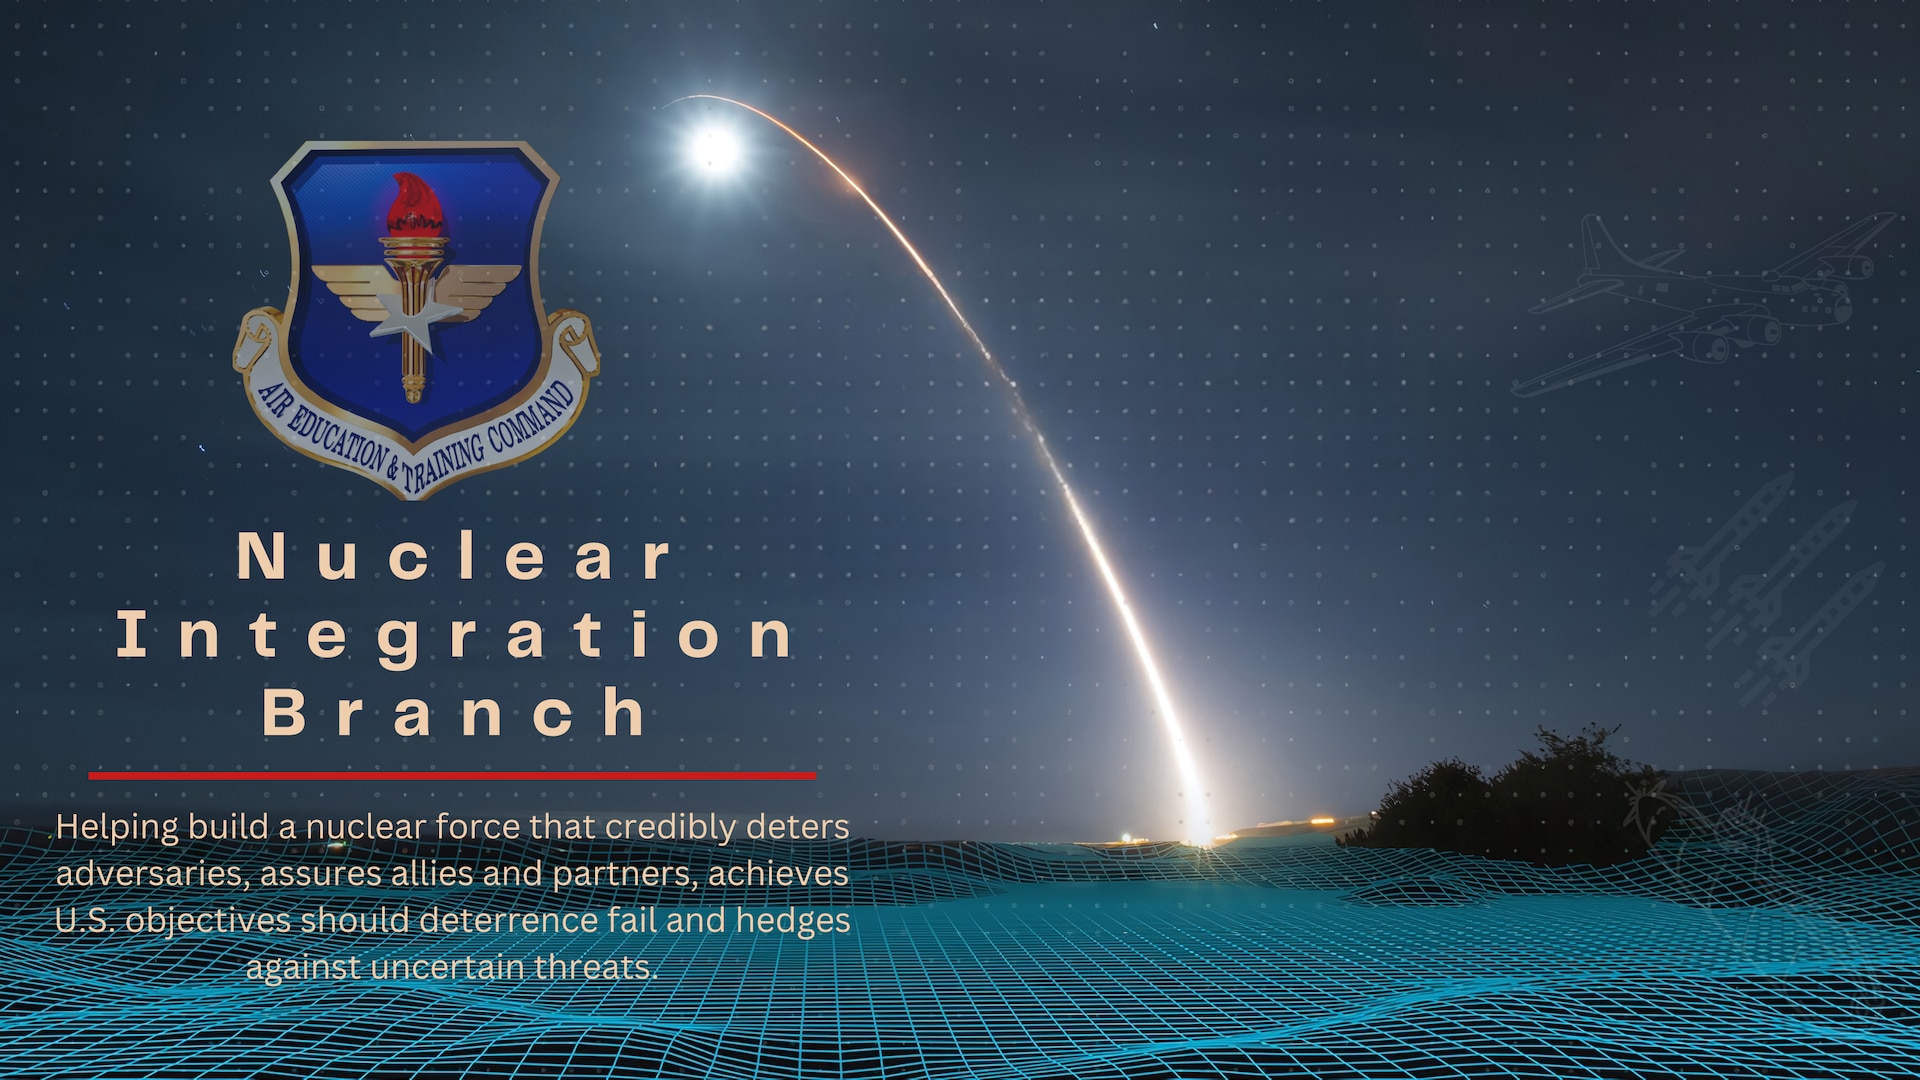 AETC logo on digital landscape with missile launch